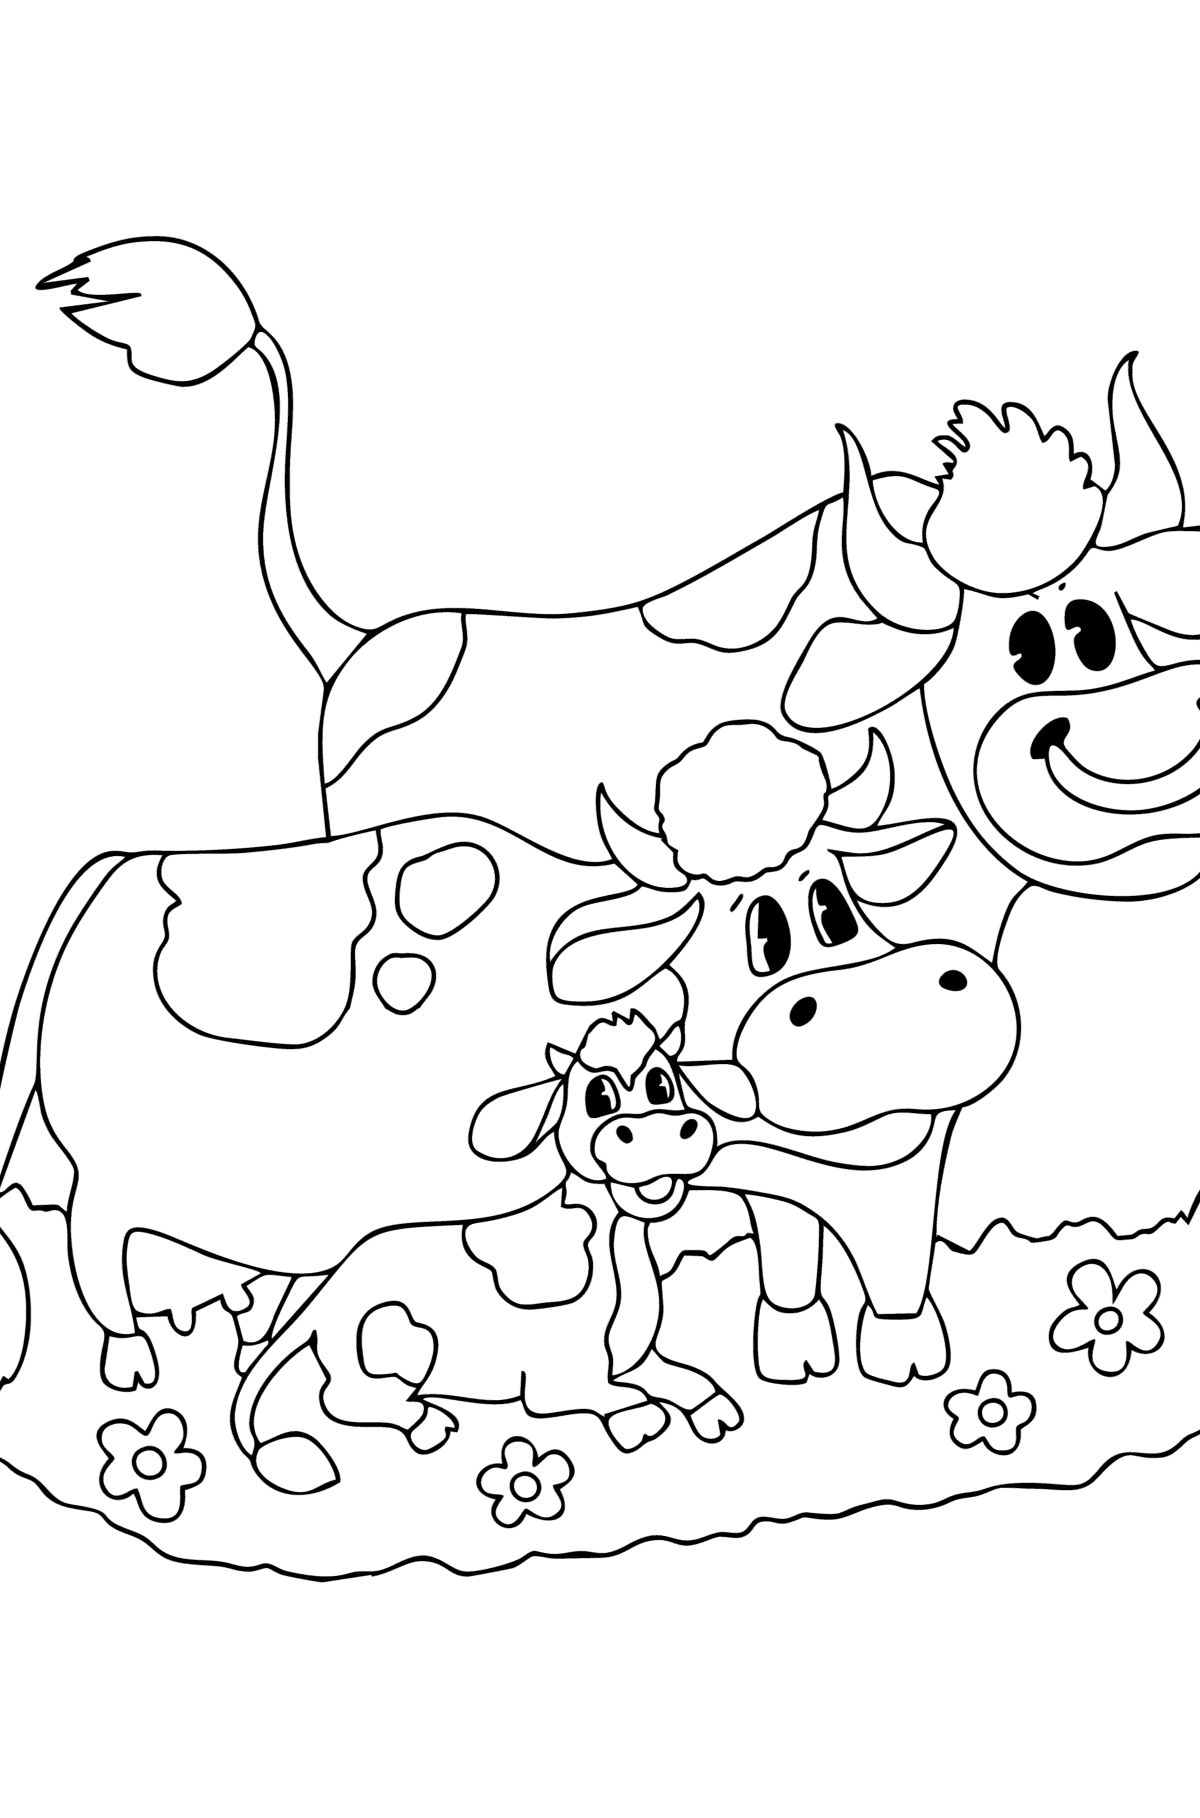 Cow, bull and calf coloring page - Coloring Pages for Kids